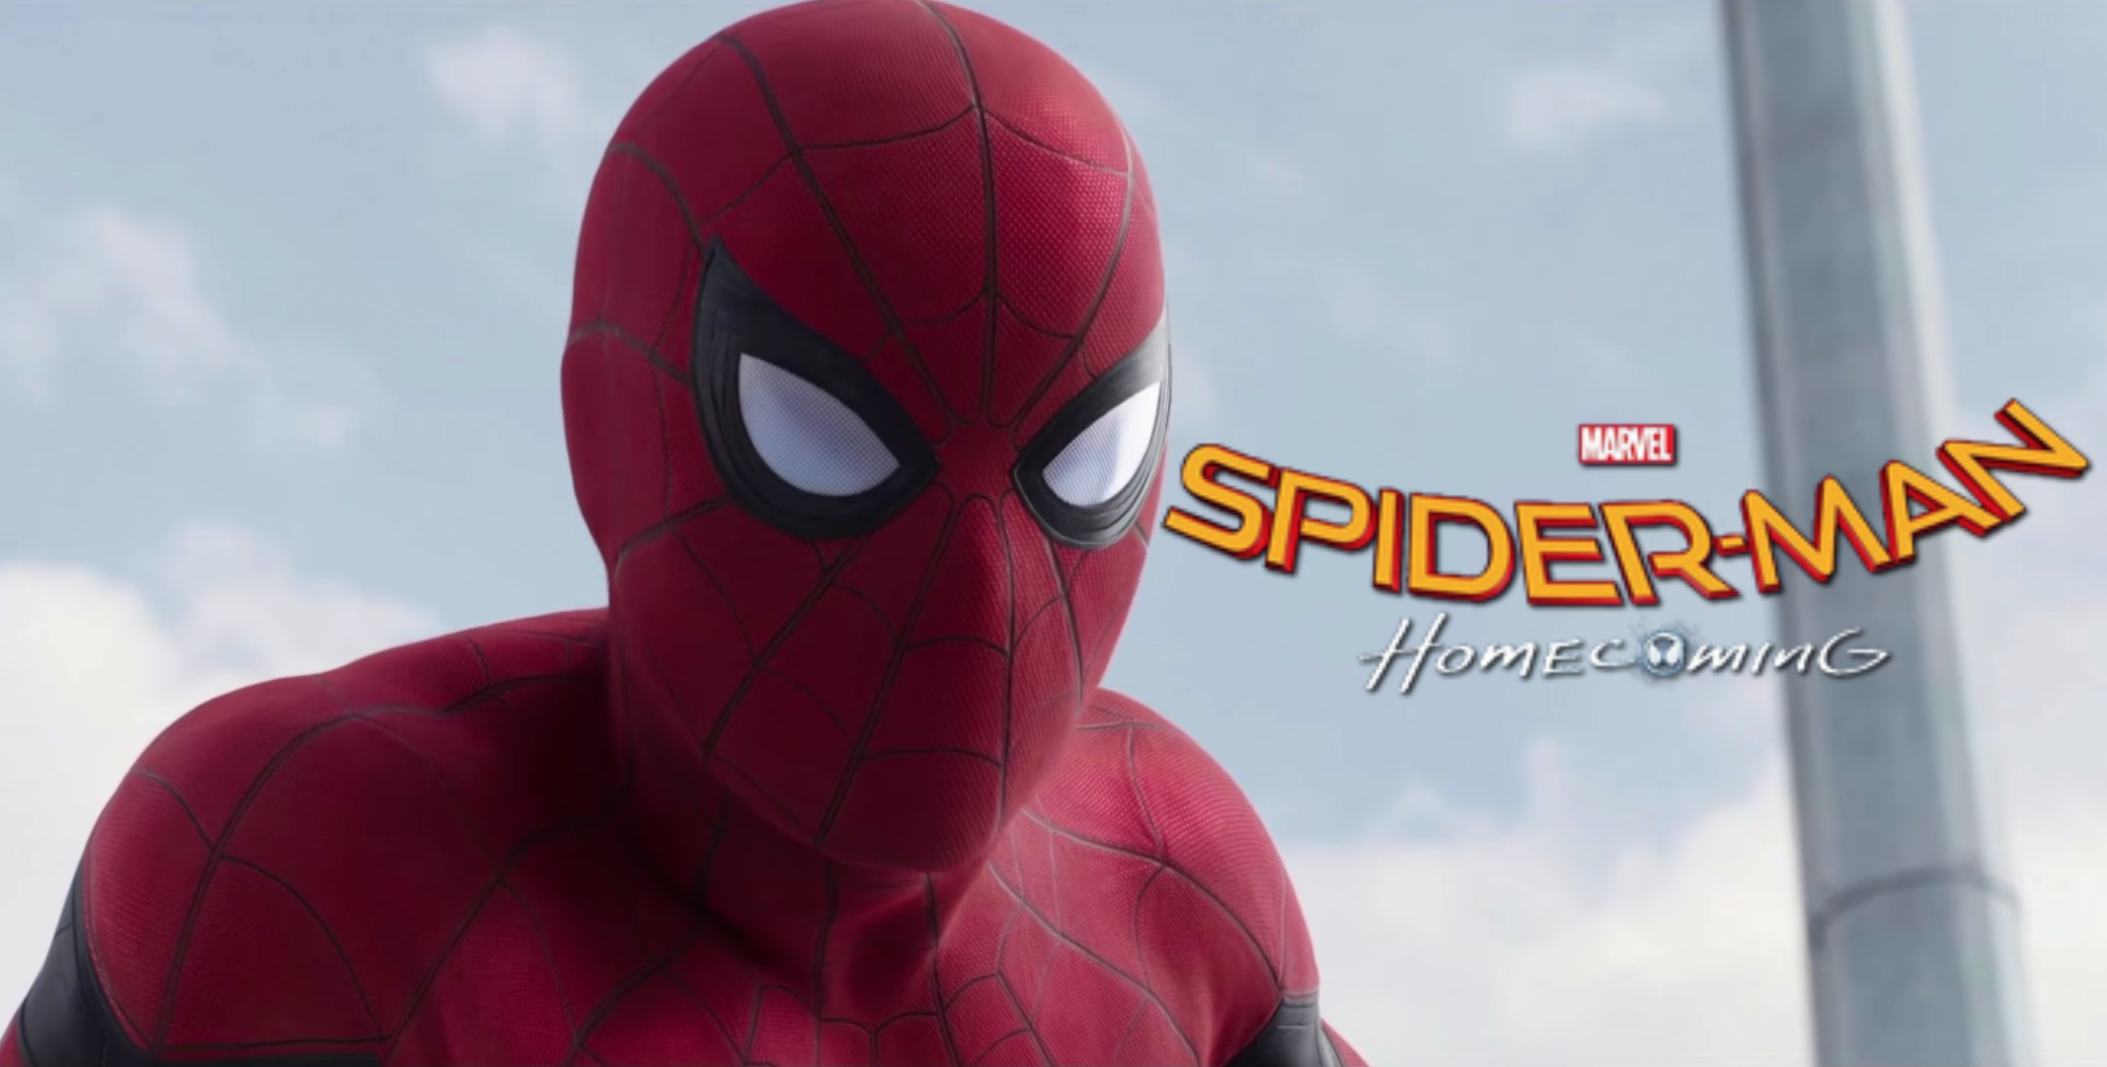 Spider-Man: Homecoming Backgrounds, Compatible - PC, Mobile, Gadgets| 2107x1067 px